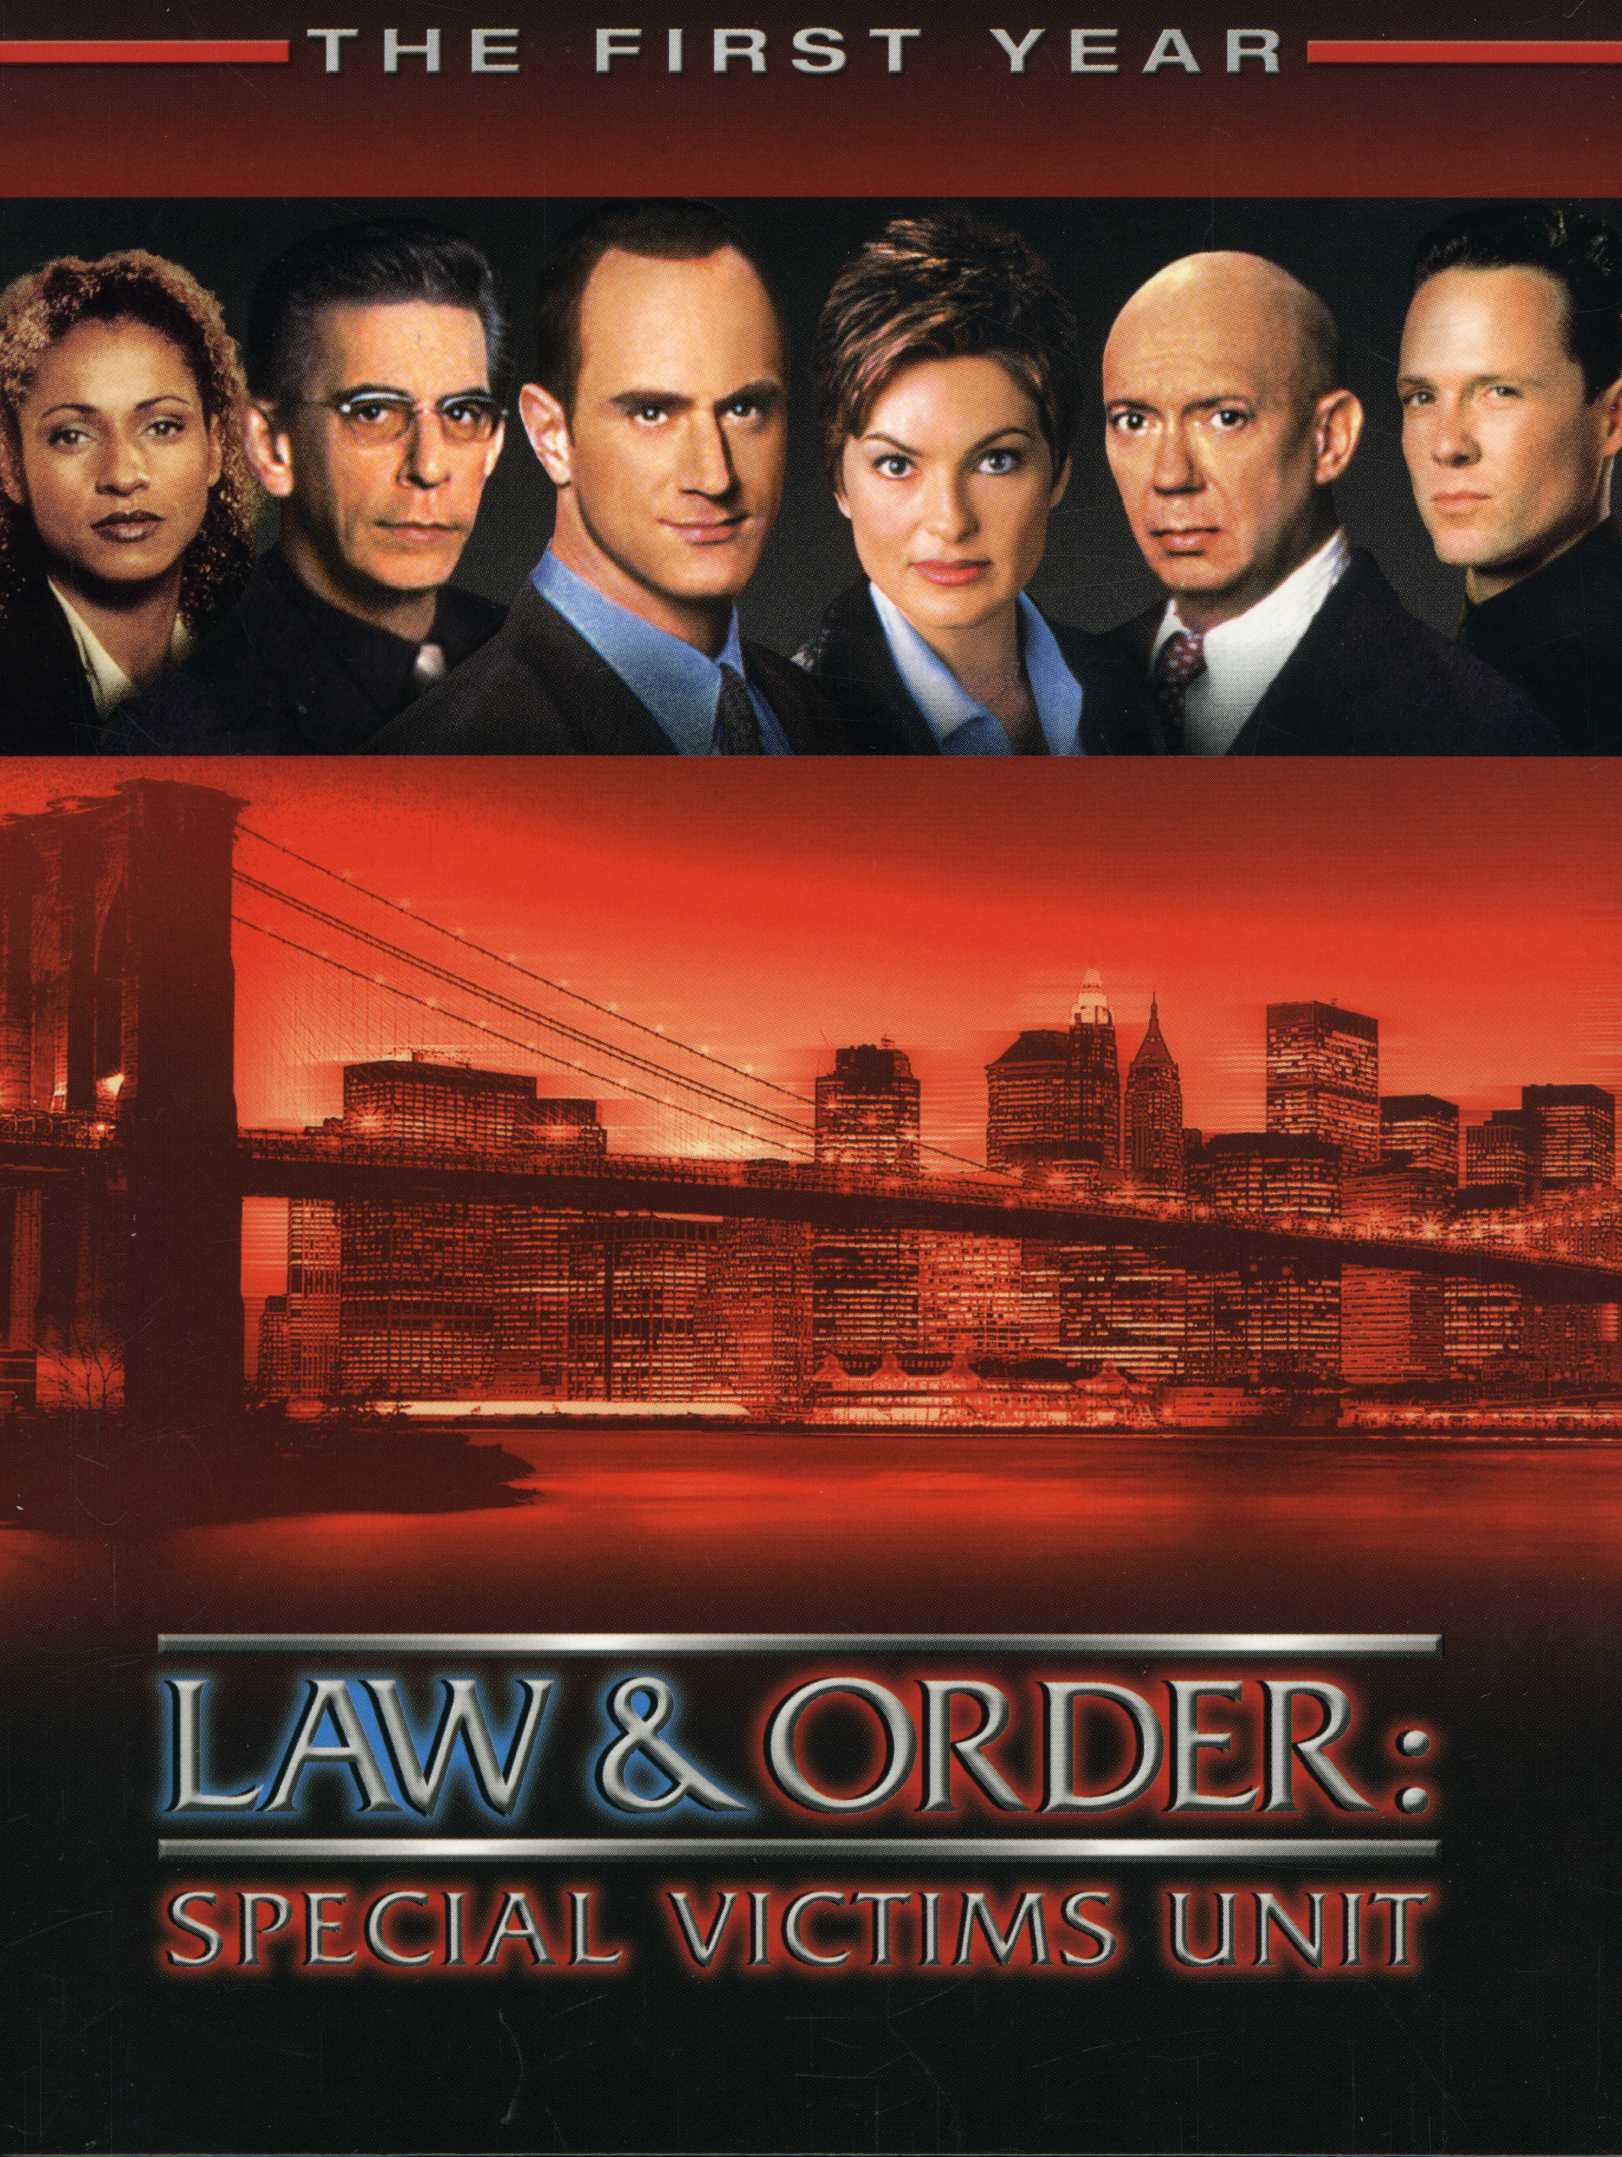 LAW & ORDER: SPECIAL VICTIMS UNIT - THE FIRST YEAR